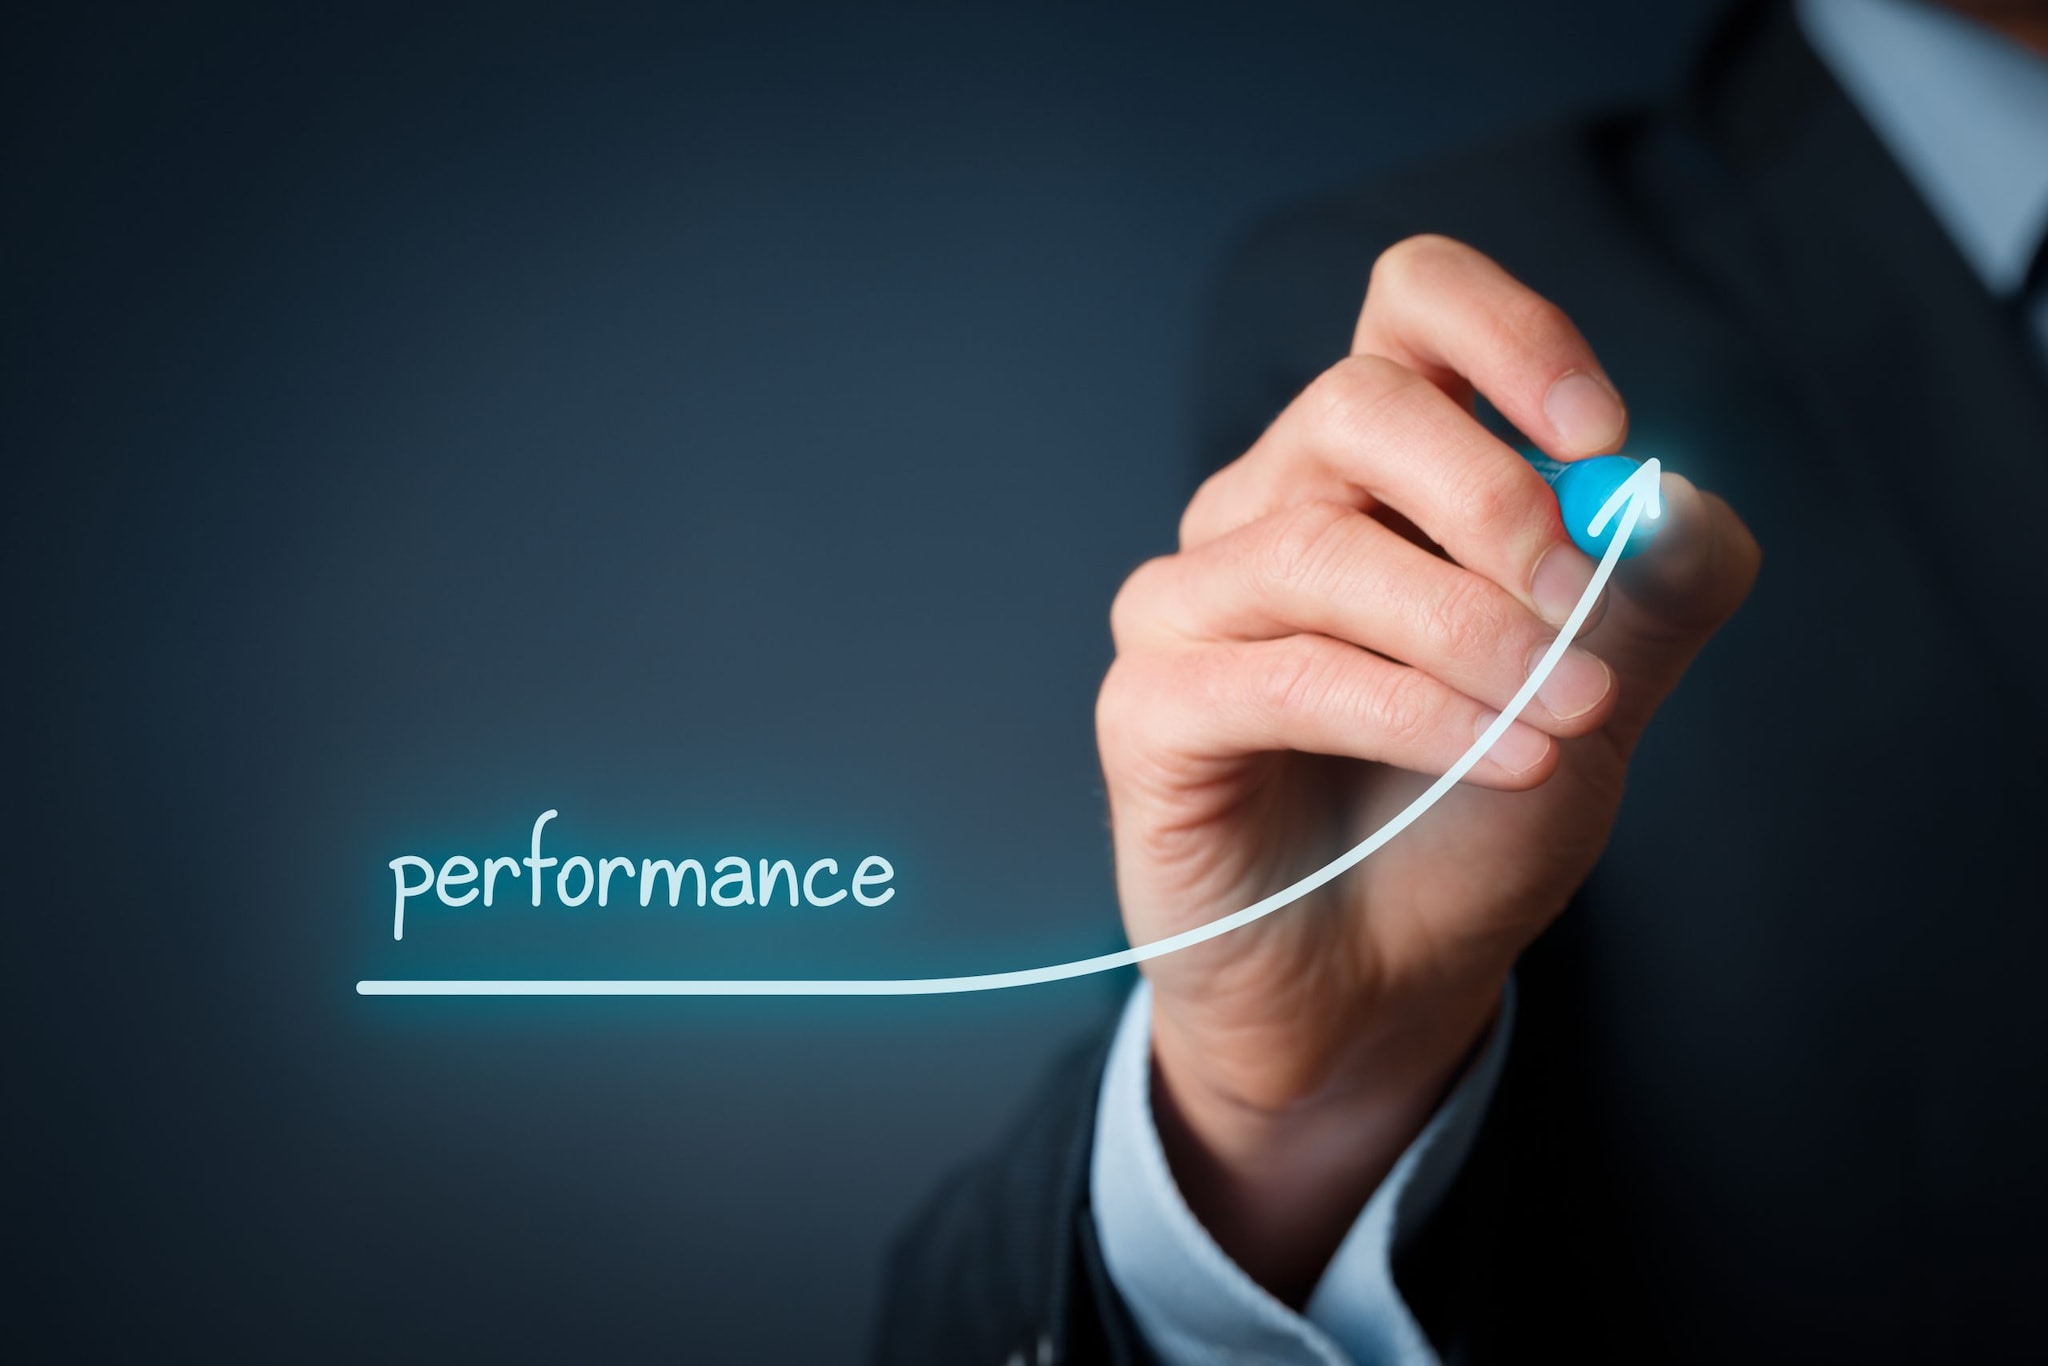 Performance increases